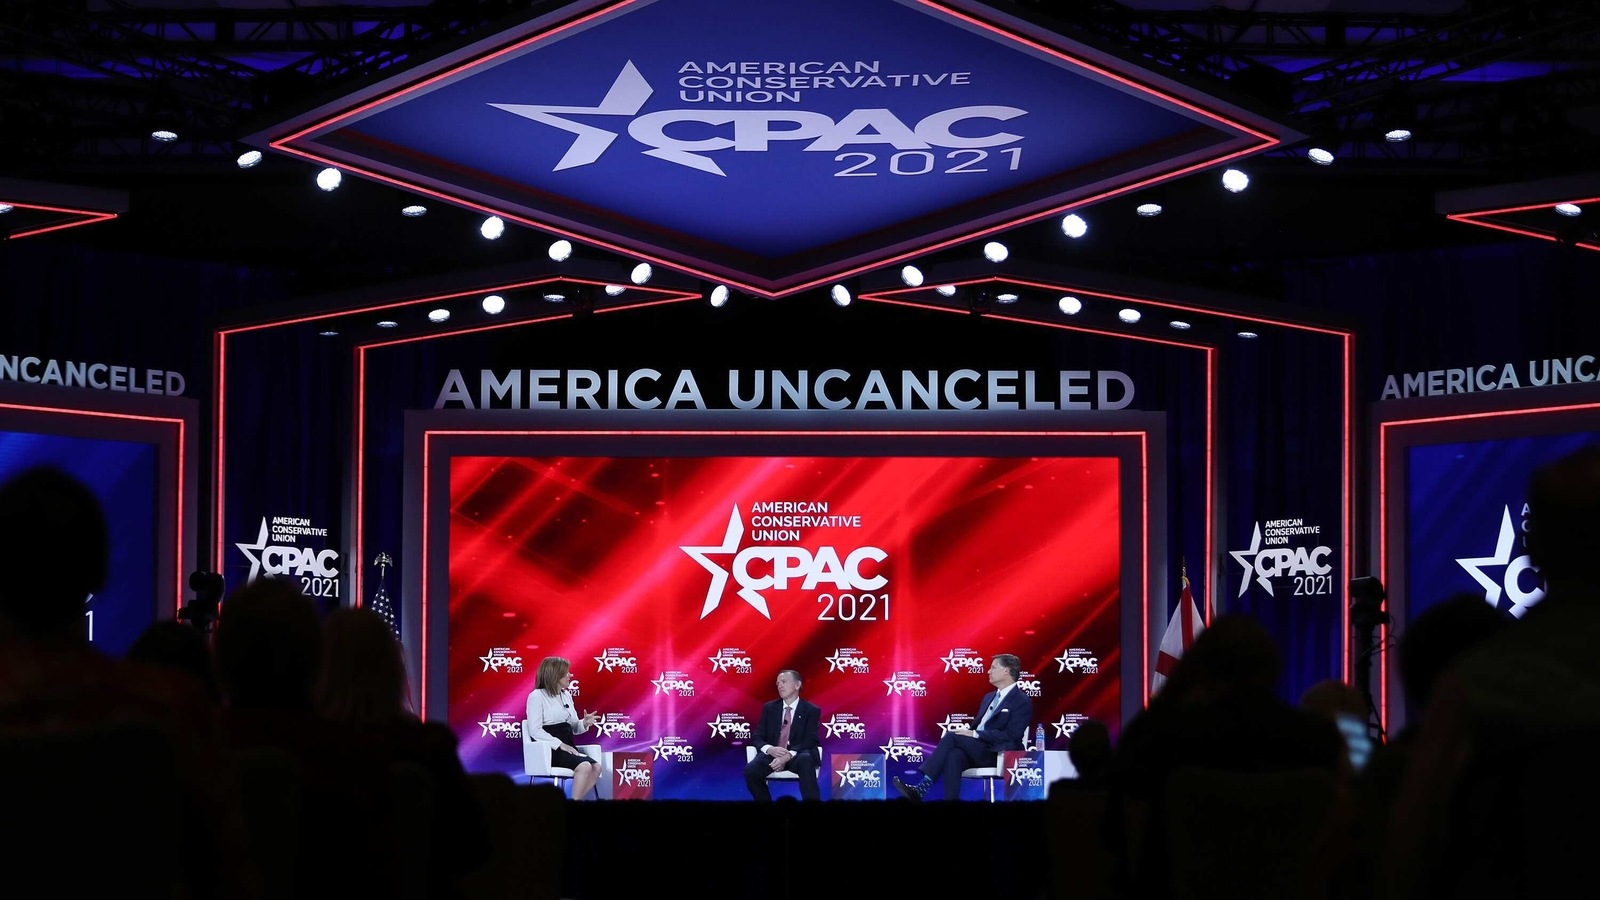 Brief history of CPAC that continues to maintain influence over US